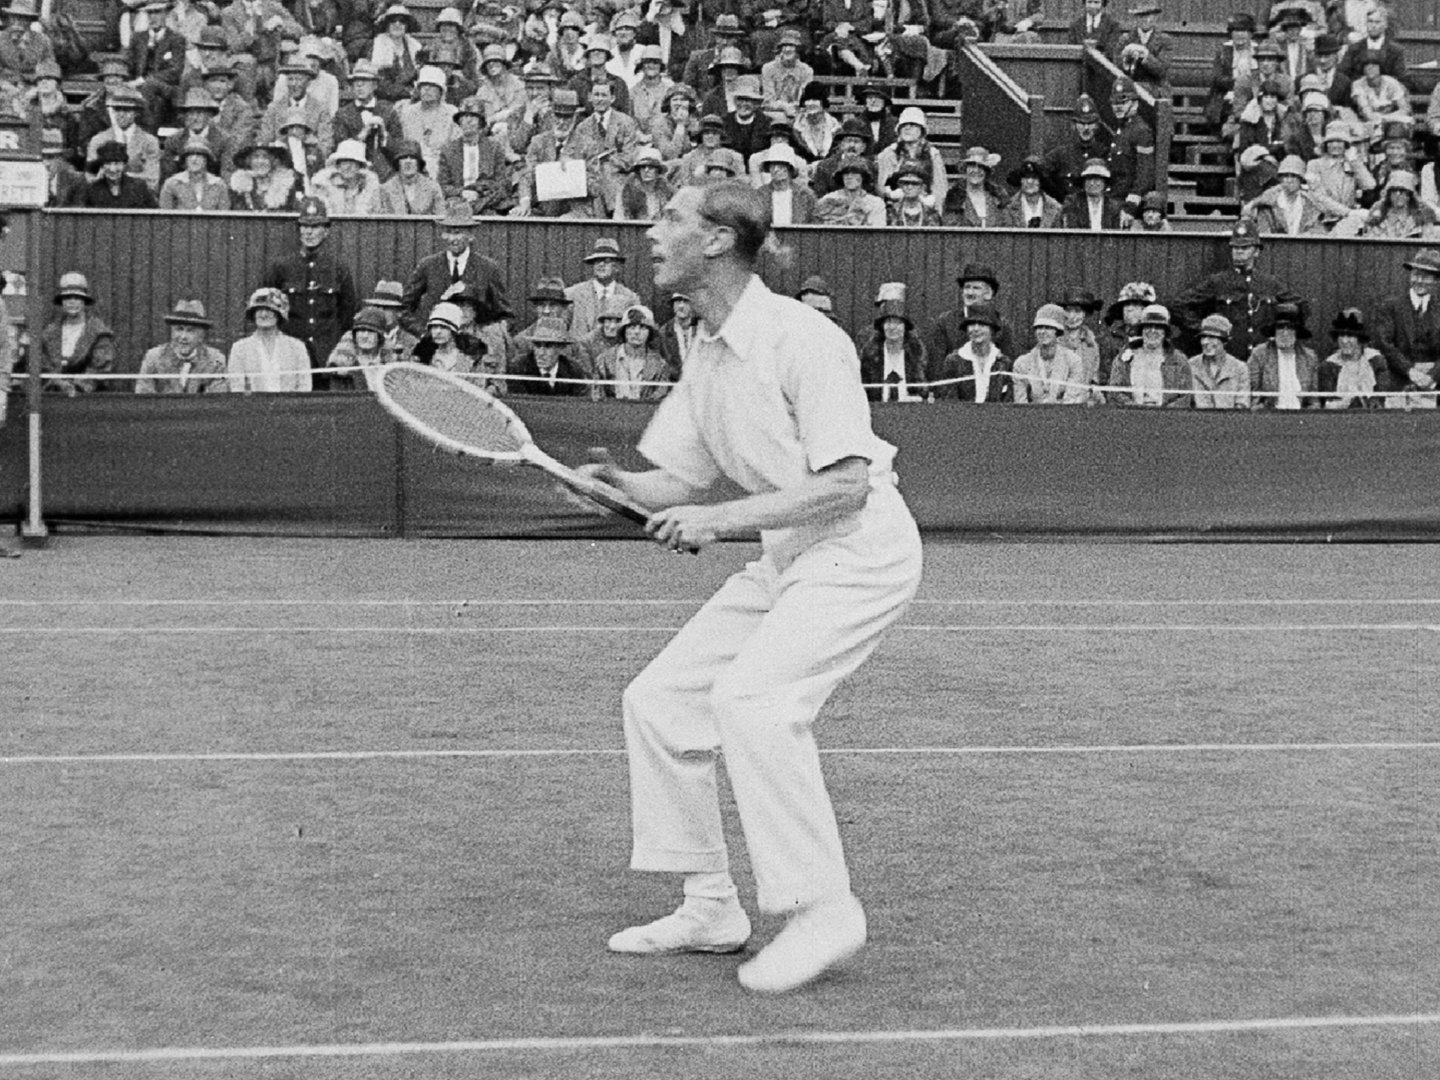 BFI on Twitter: &quot;A royal court: The Duke of York, the future King George  VI, plays at the Wimbledon Tennis Championships in 1926 #TennisOnFilm  https://t.co/riimzS7Xla&quot; / Twitter